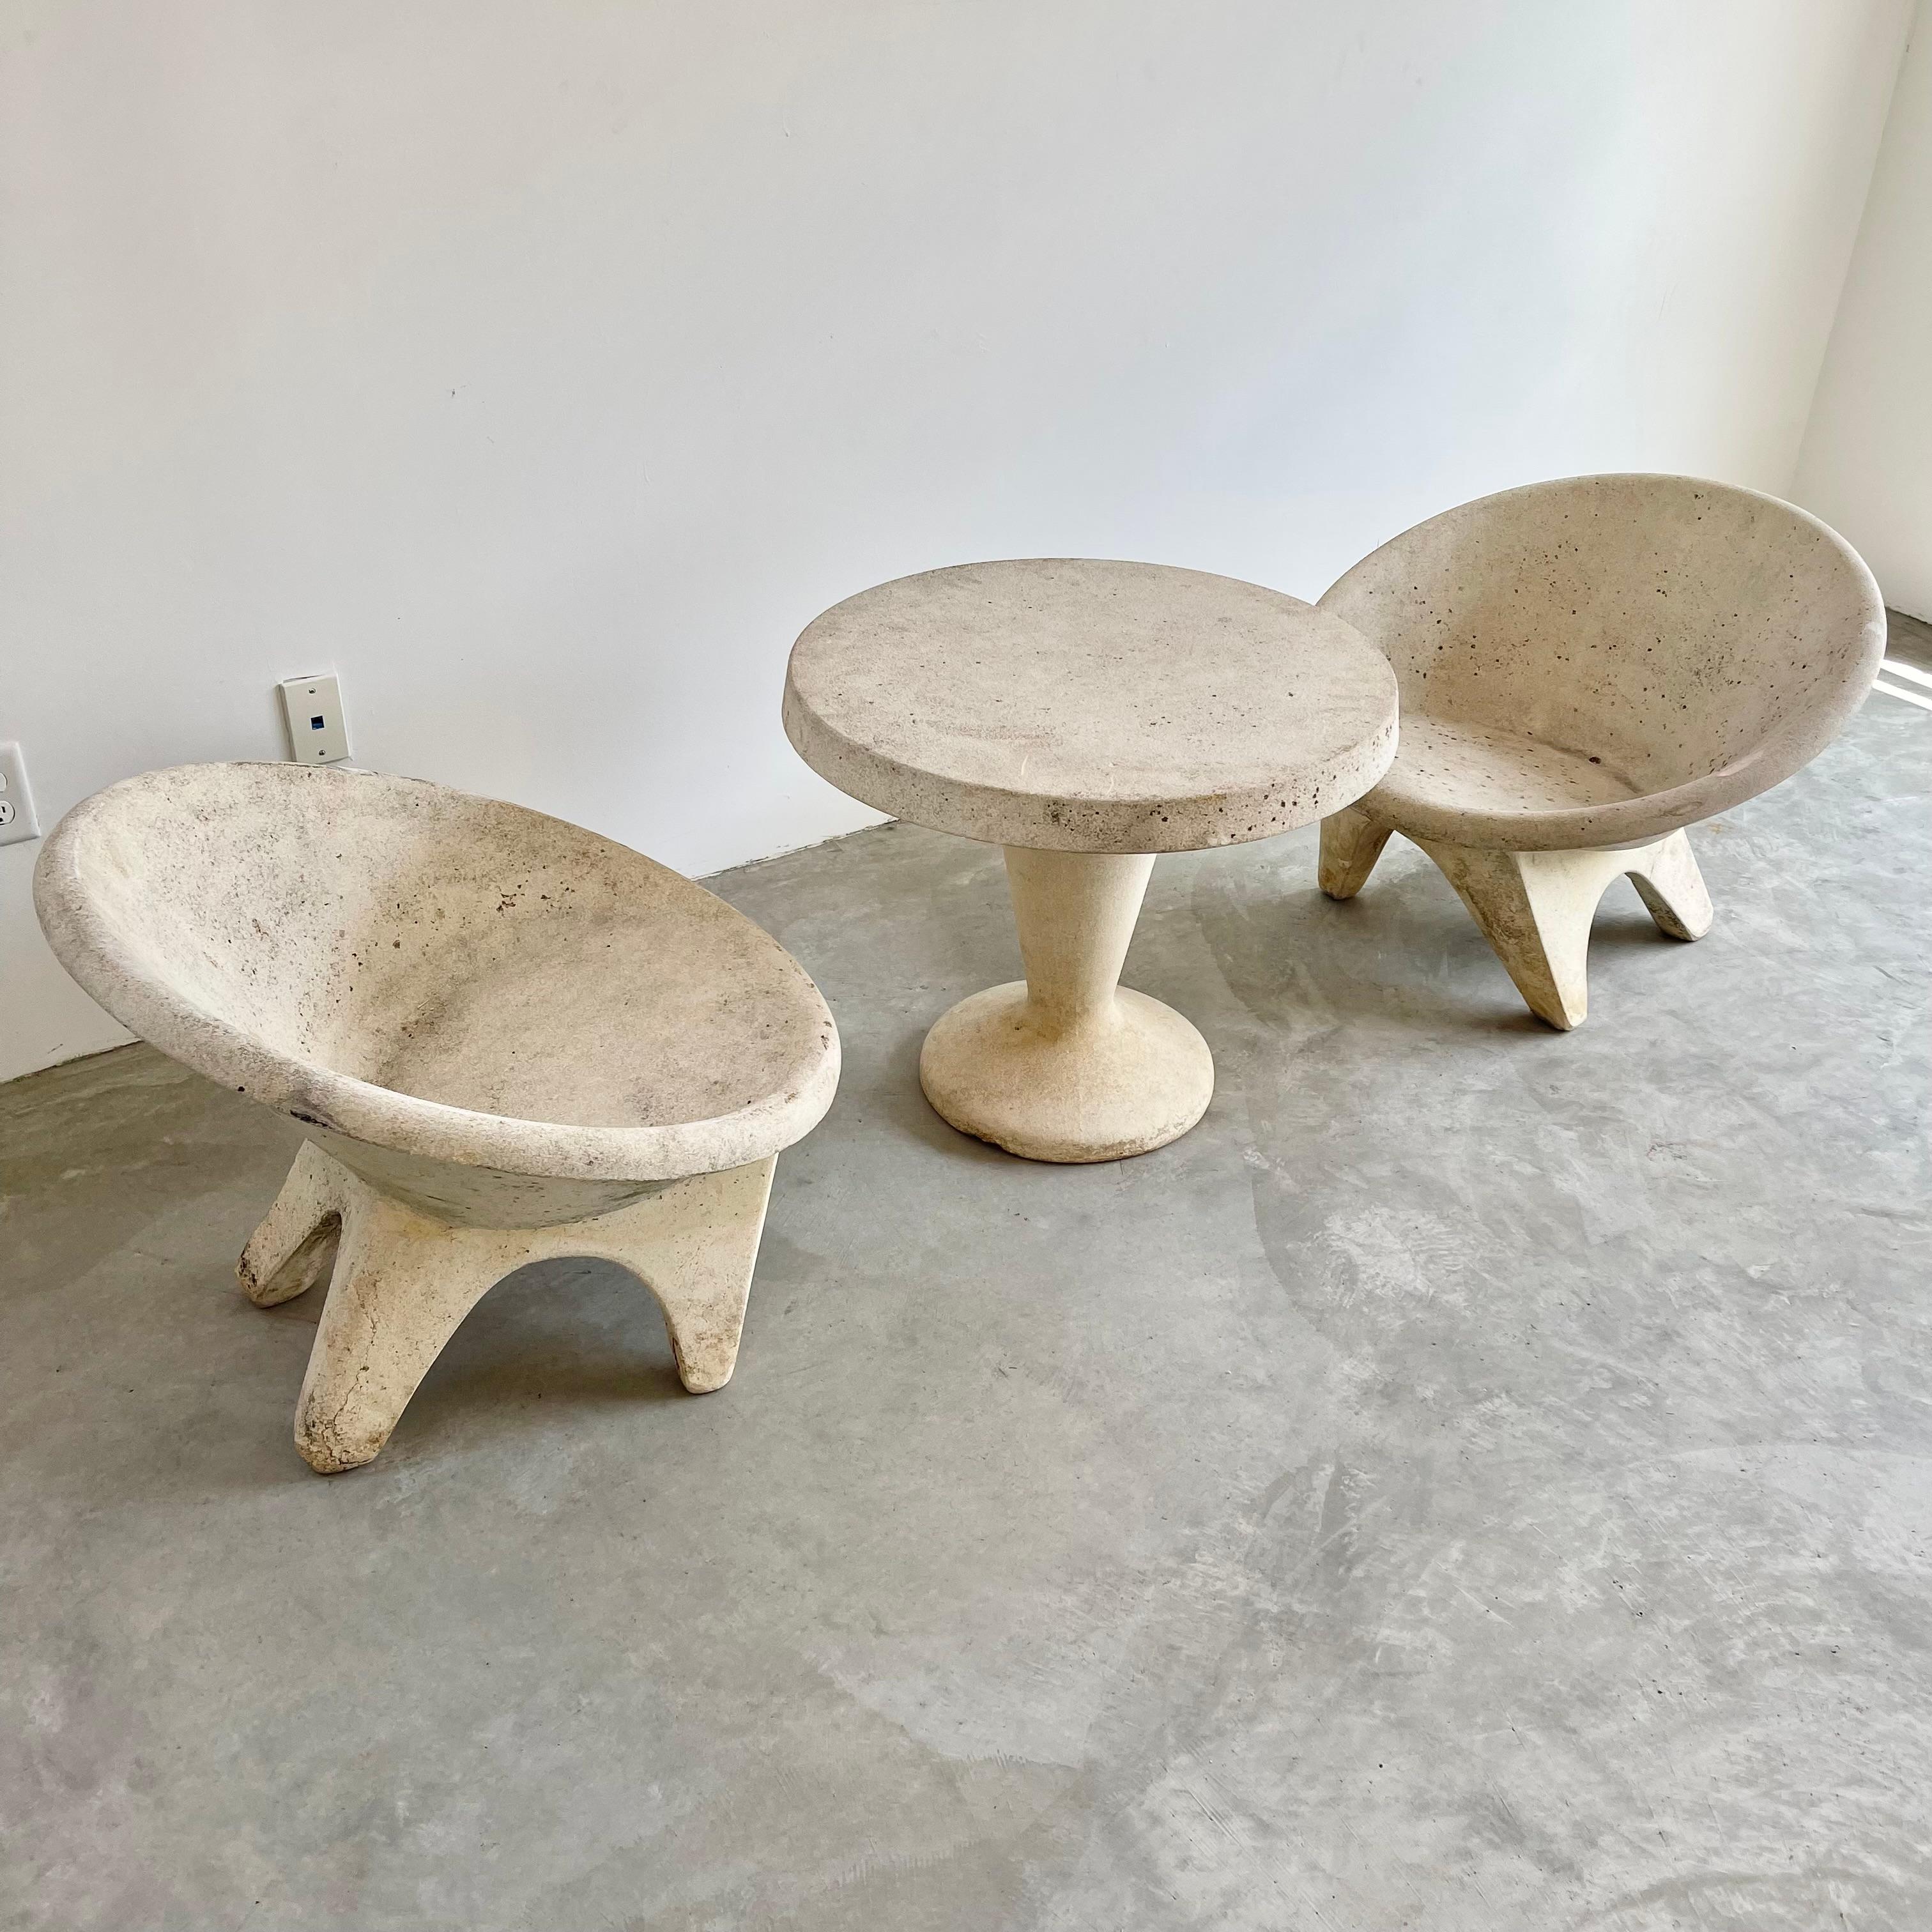 Cement Sculptural Concrete Chairs and Table, 1960s Switzerland